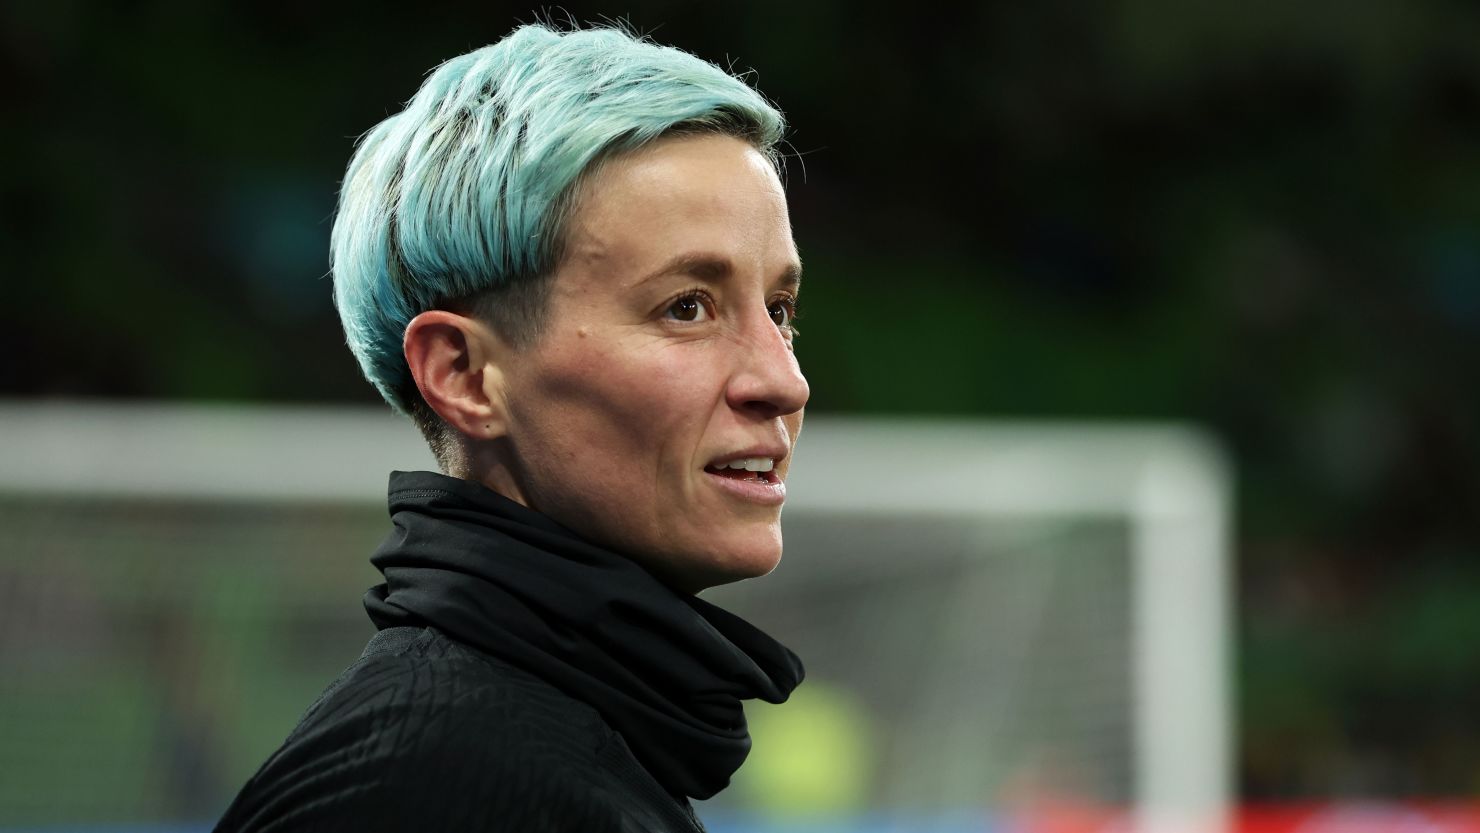 MELBOURNE, AUSTRALIA - AUGUST 06: Megan Rapinoe of USA is seen during the warm up prior to the FIFA Women's World Cup Australia & New Zealand 2023 Round of 16 match between Sweden and USA at Melbourne Rectangular Stadium on August 06, 2023 in Melbourne / Naarm, Australia. (Photo by Robert Cianflone/Getty Images)